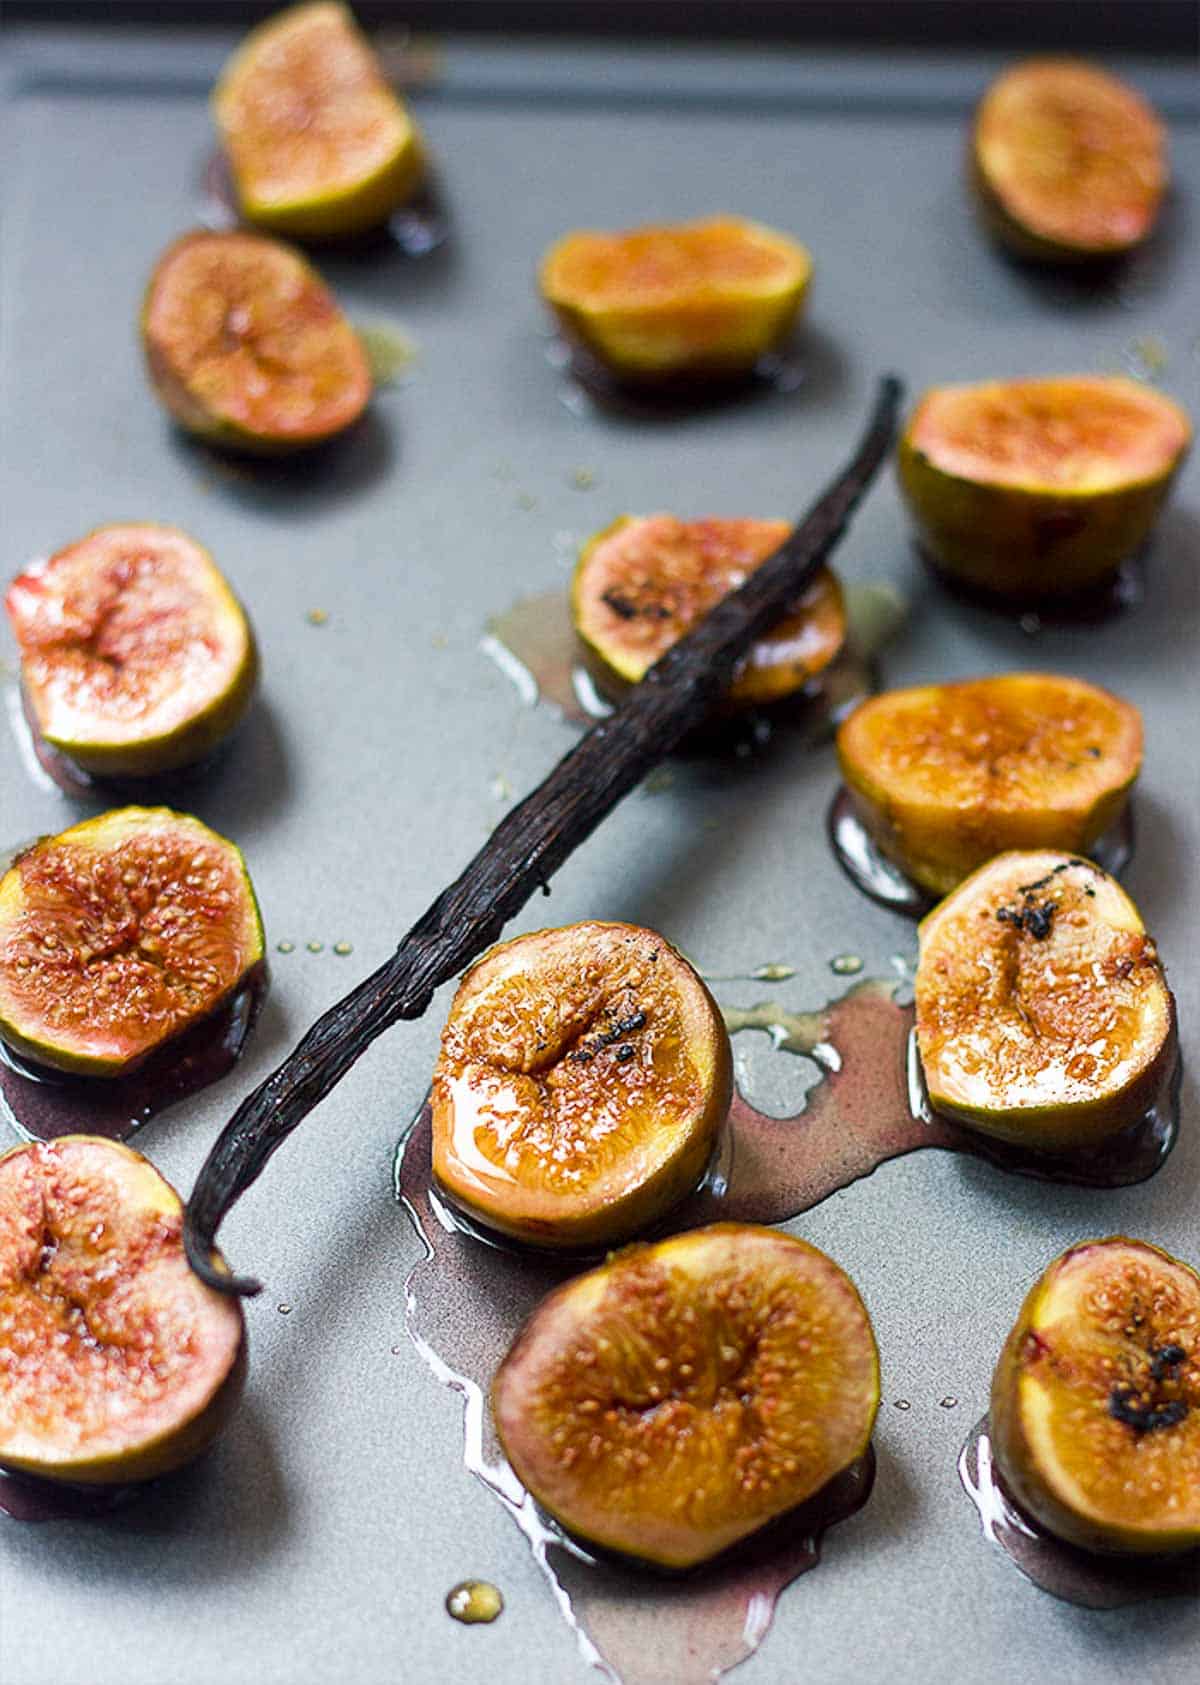 Vanilla bean alongside the figs drizzled with honey.